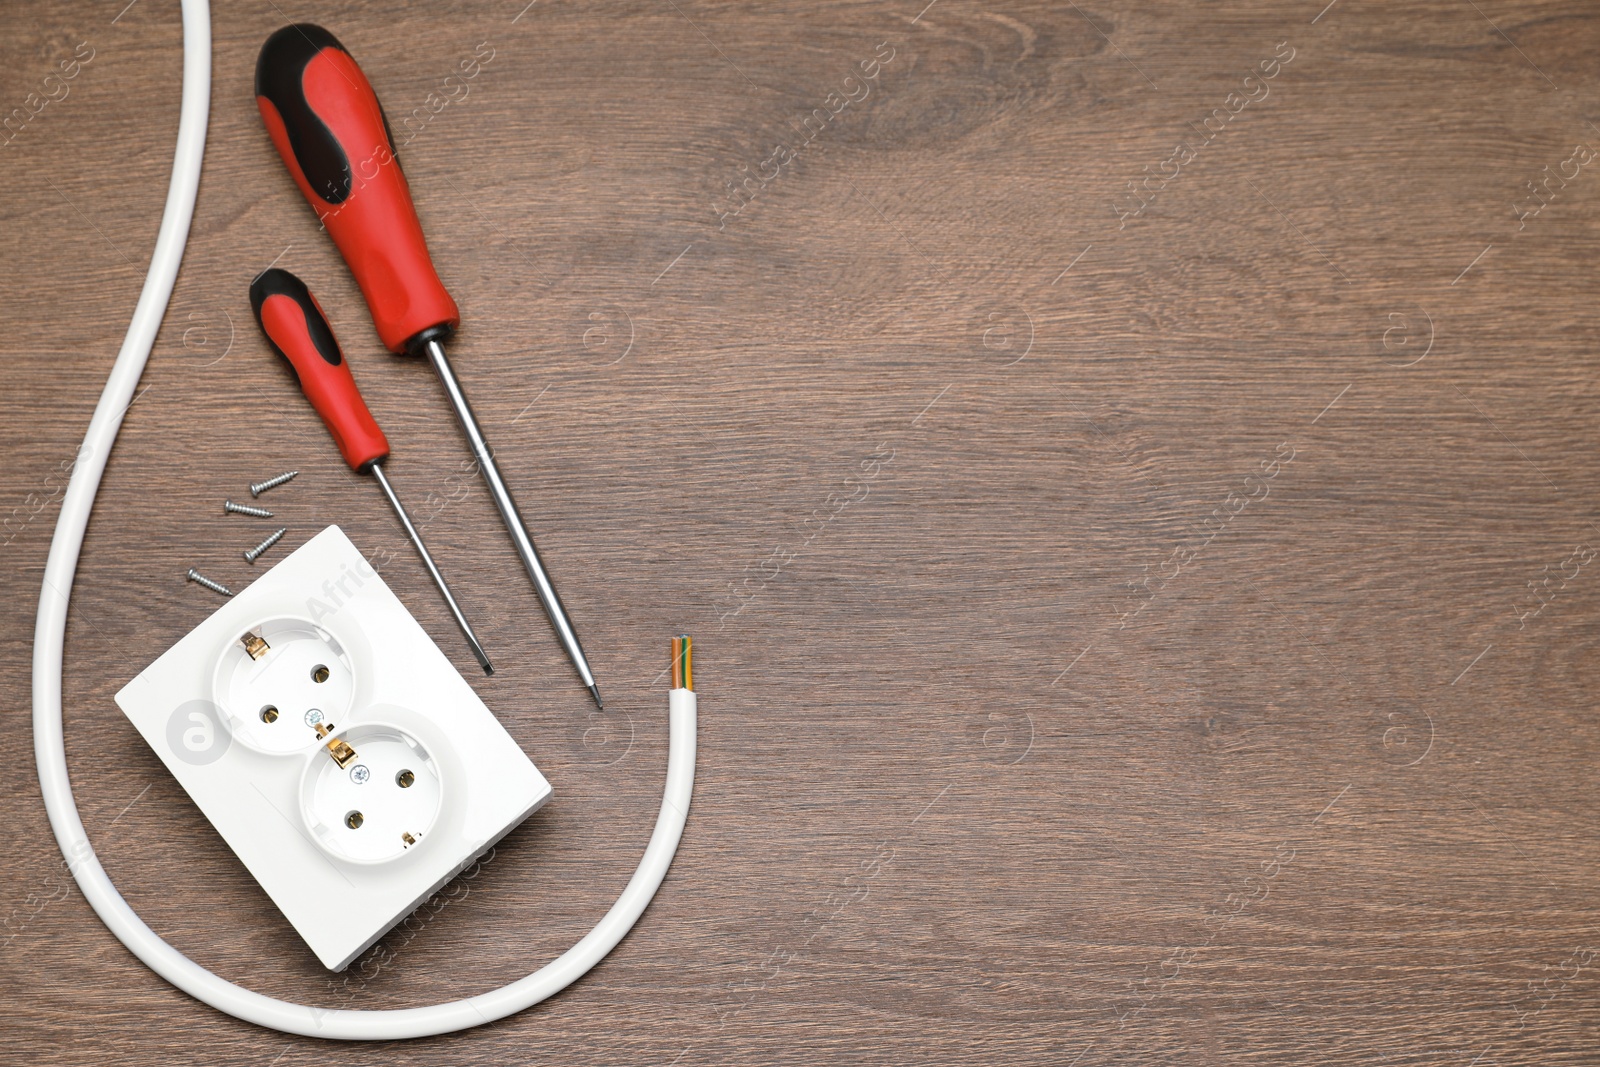 Photo of Power socket, screwdrivers and cable on wooden table, flat lay. Space for text